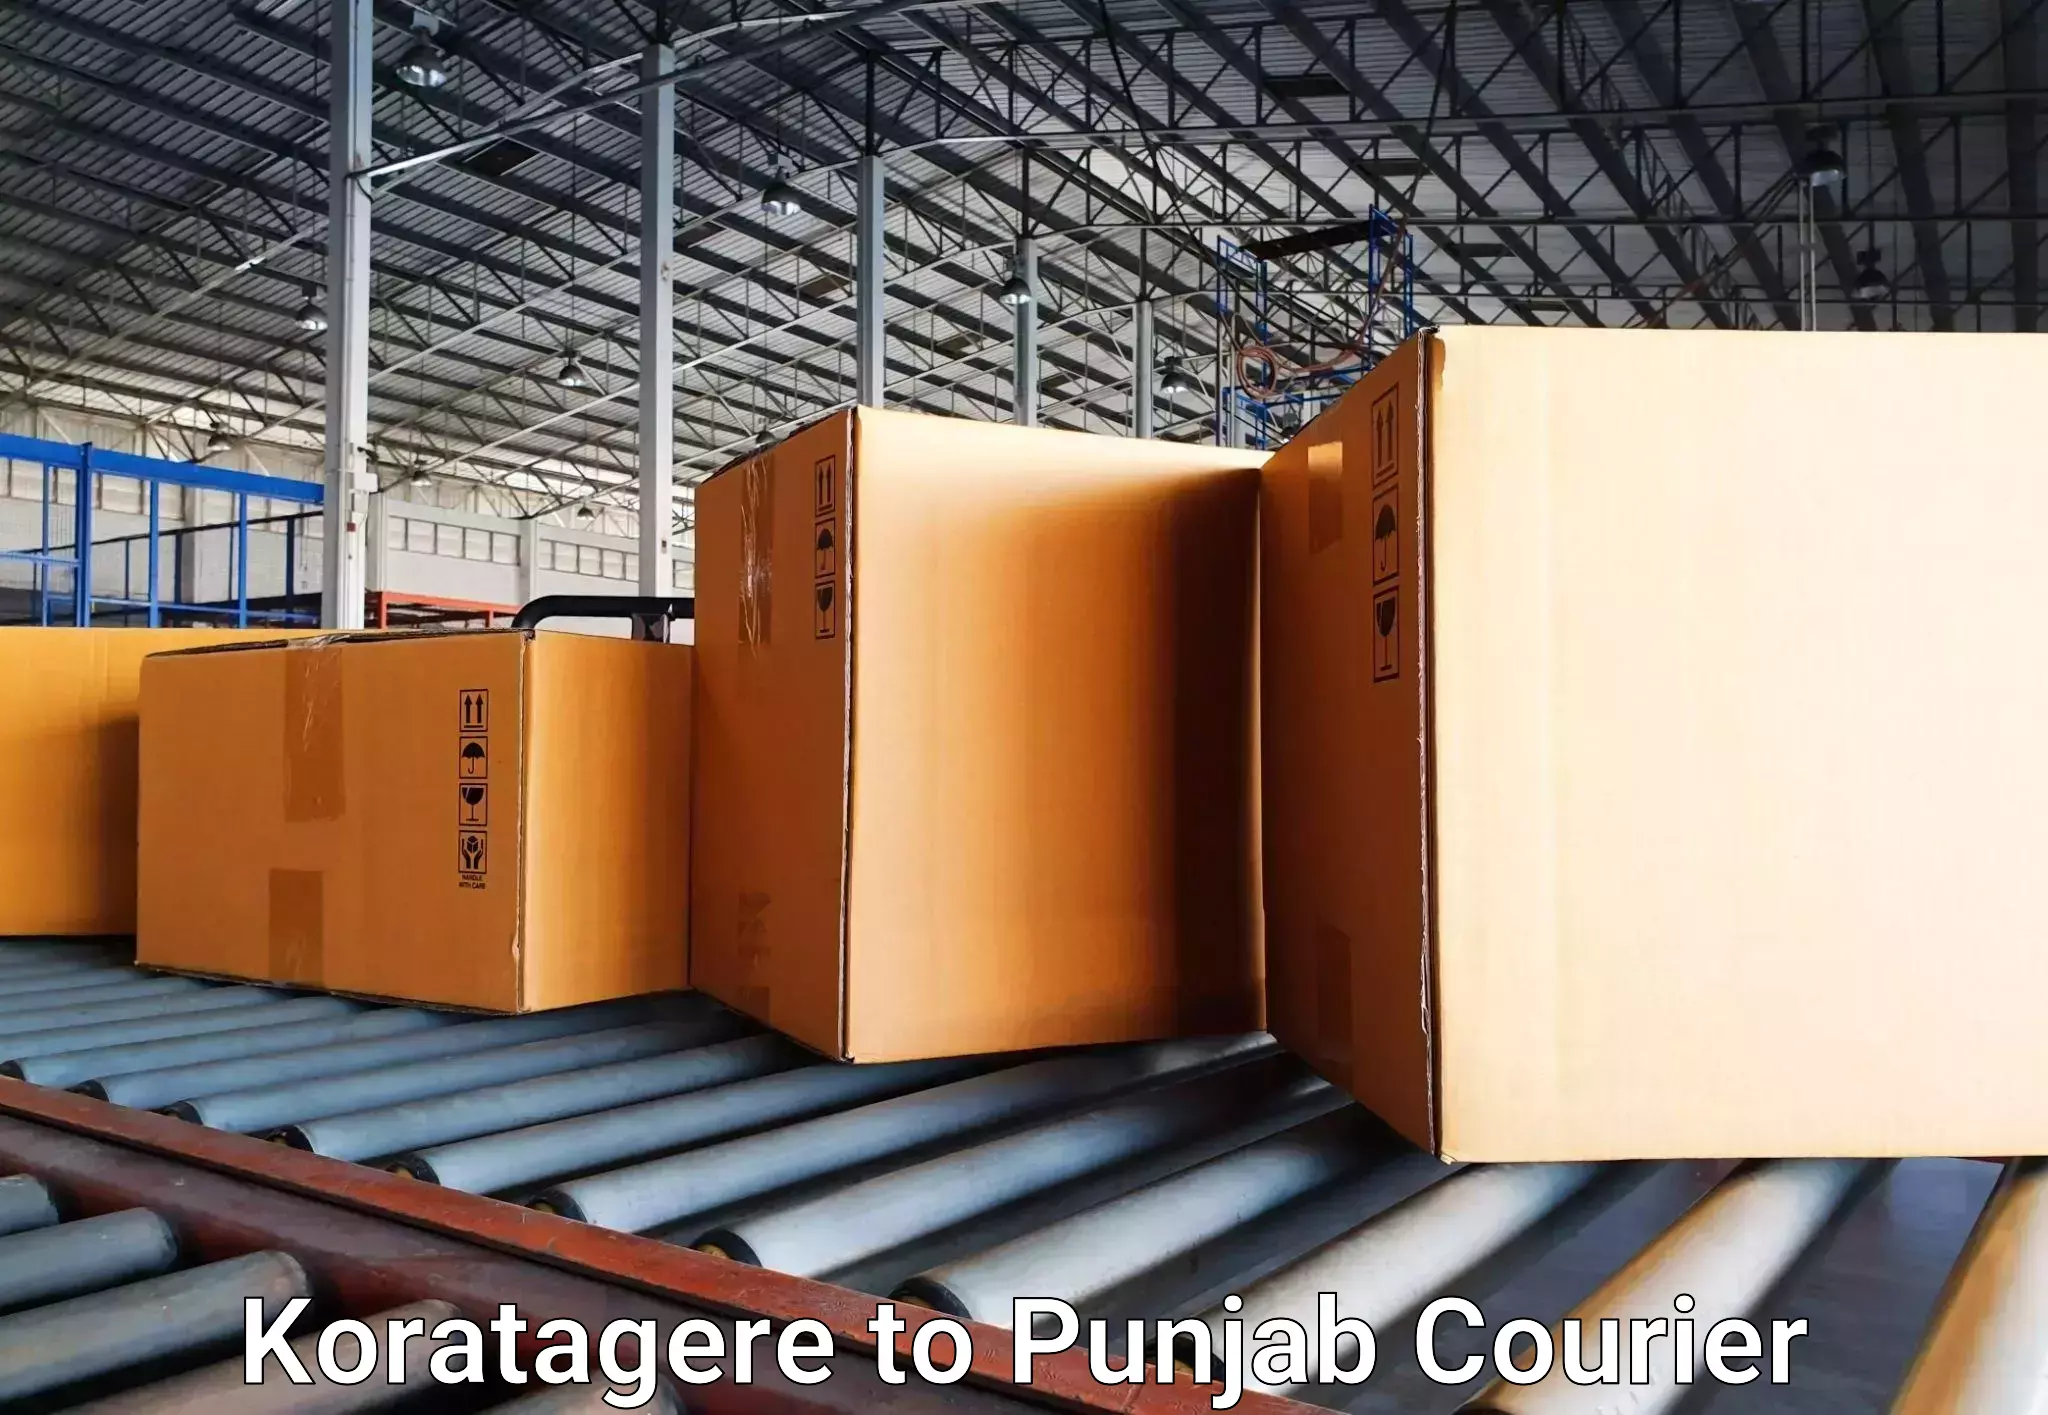 Luggage delivery operations Koratagere to Punjab